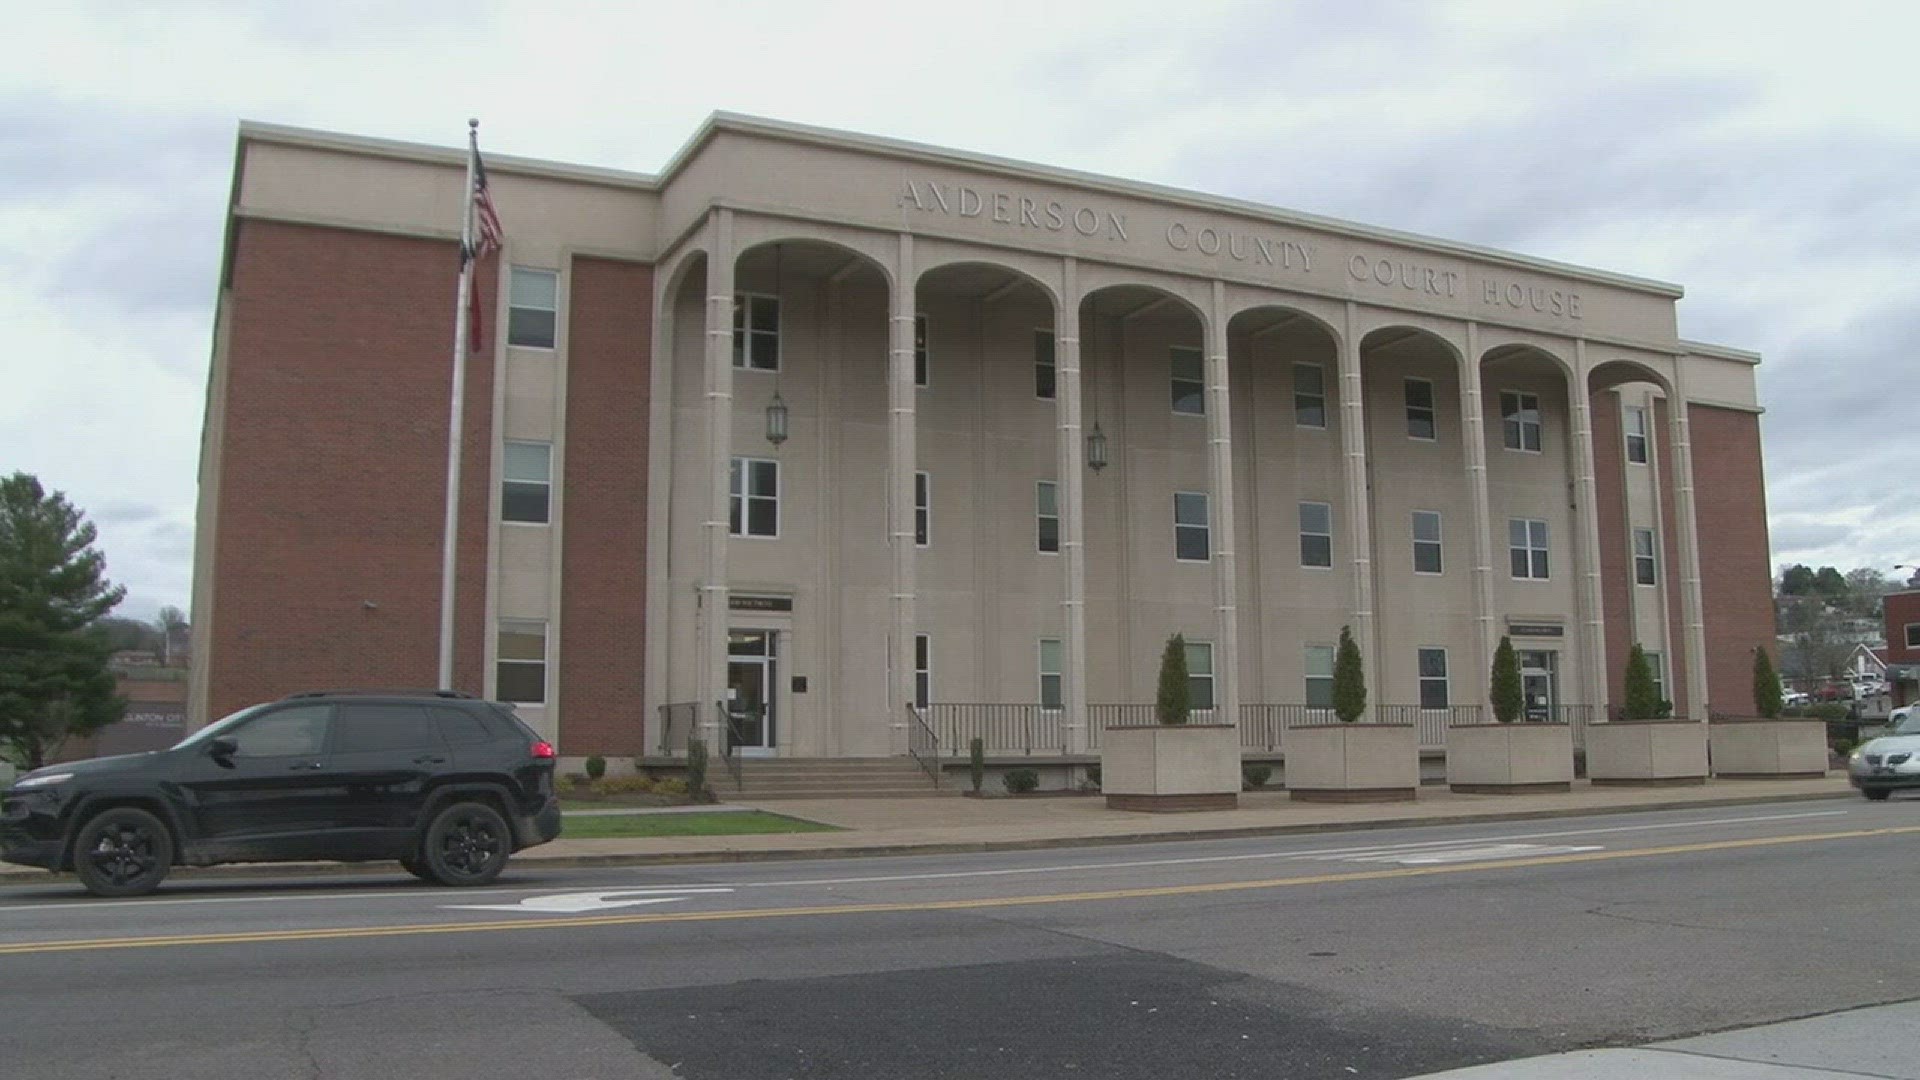 March 19, 2018: The Anderson County mayor is requesting an investigation into how the county handled sexual harassment complaints against Circuit Court Clerk William Jones.